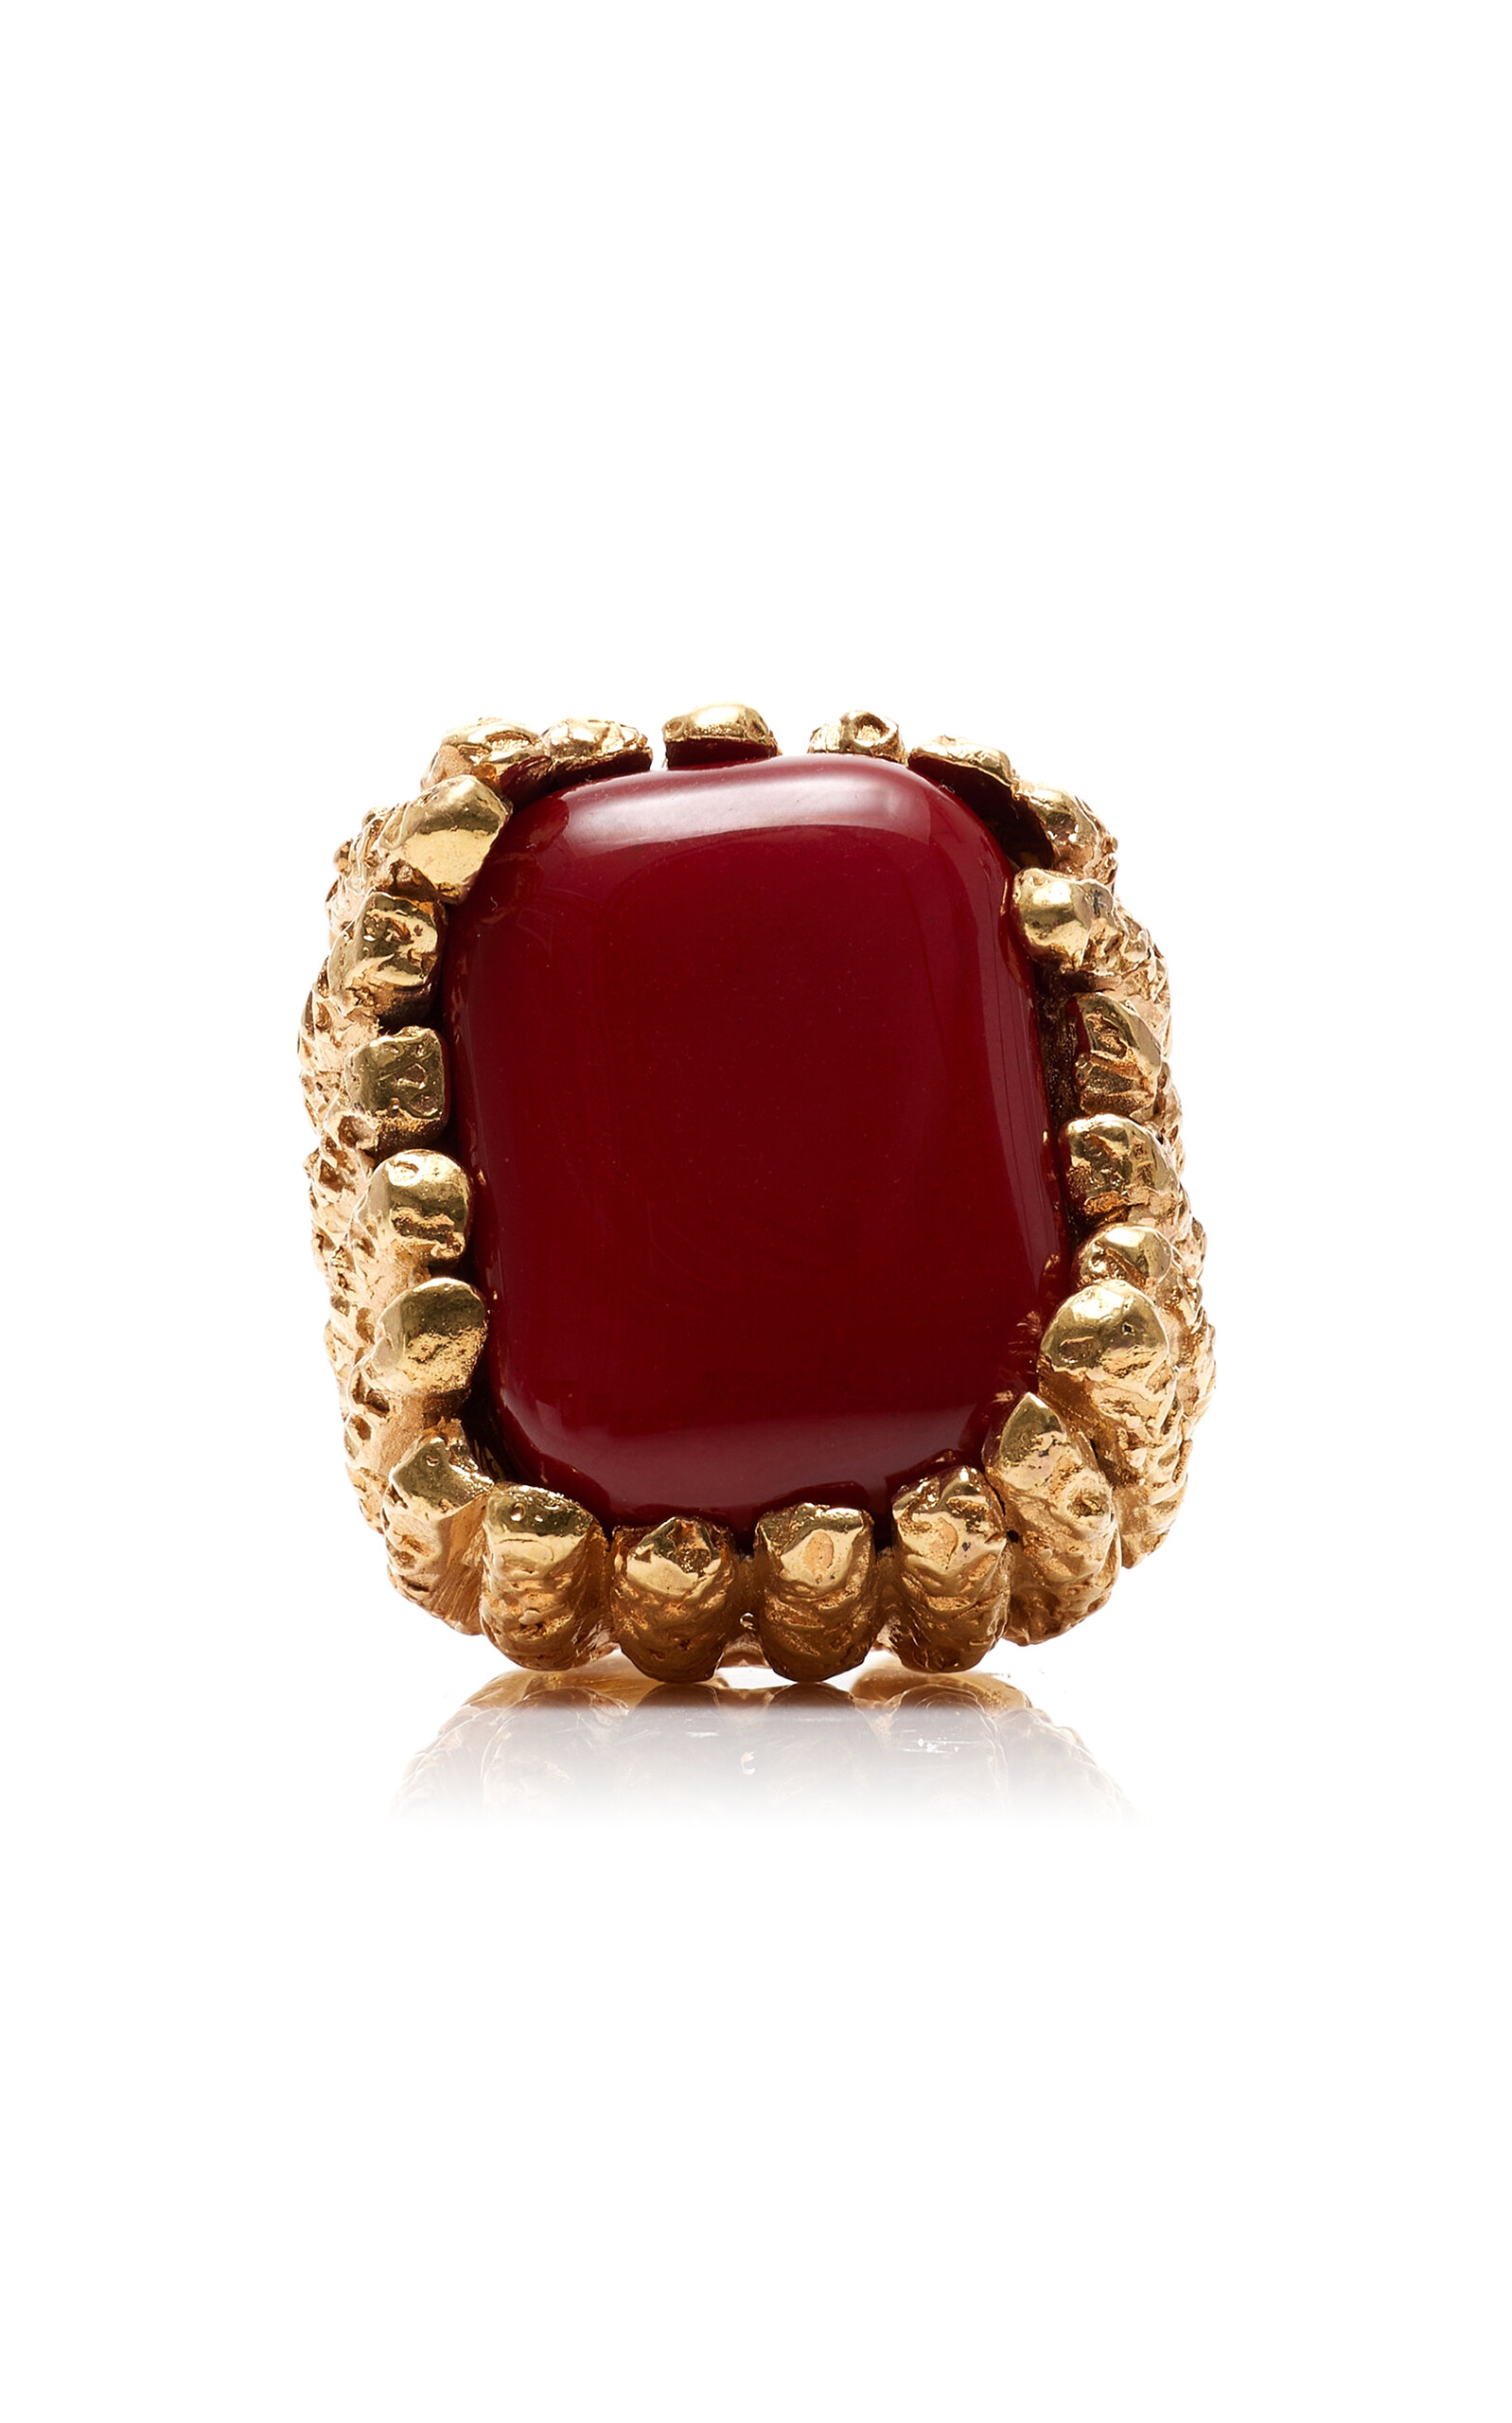 Paola Sighinolfi Bosco 18k Gold-plated Ring In Red